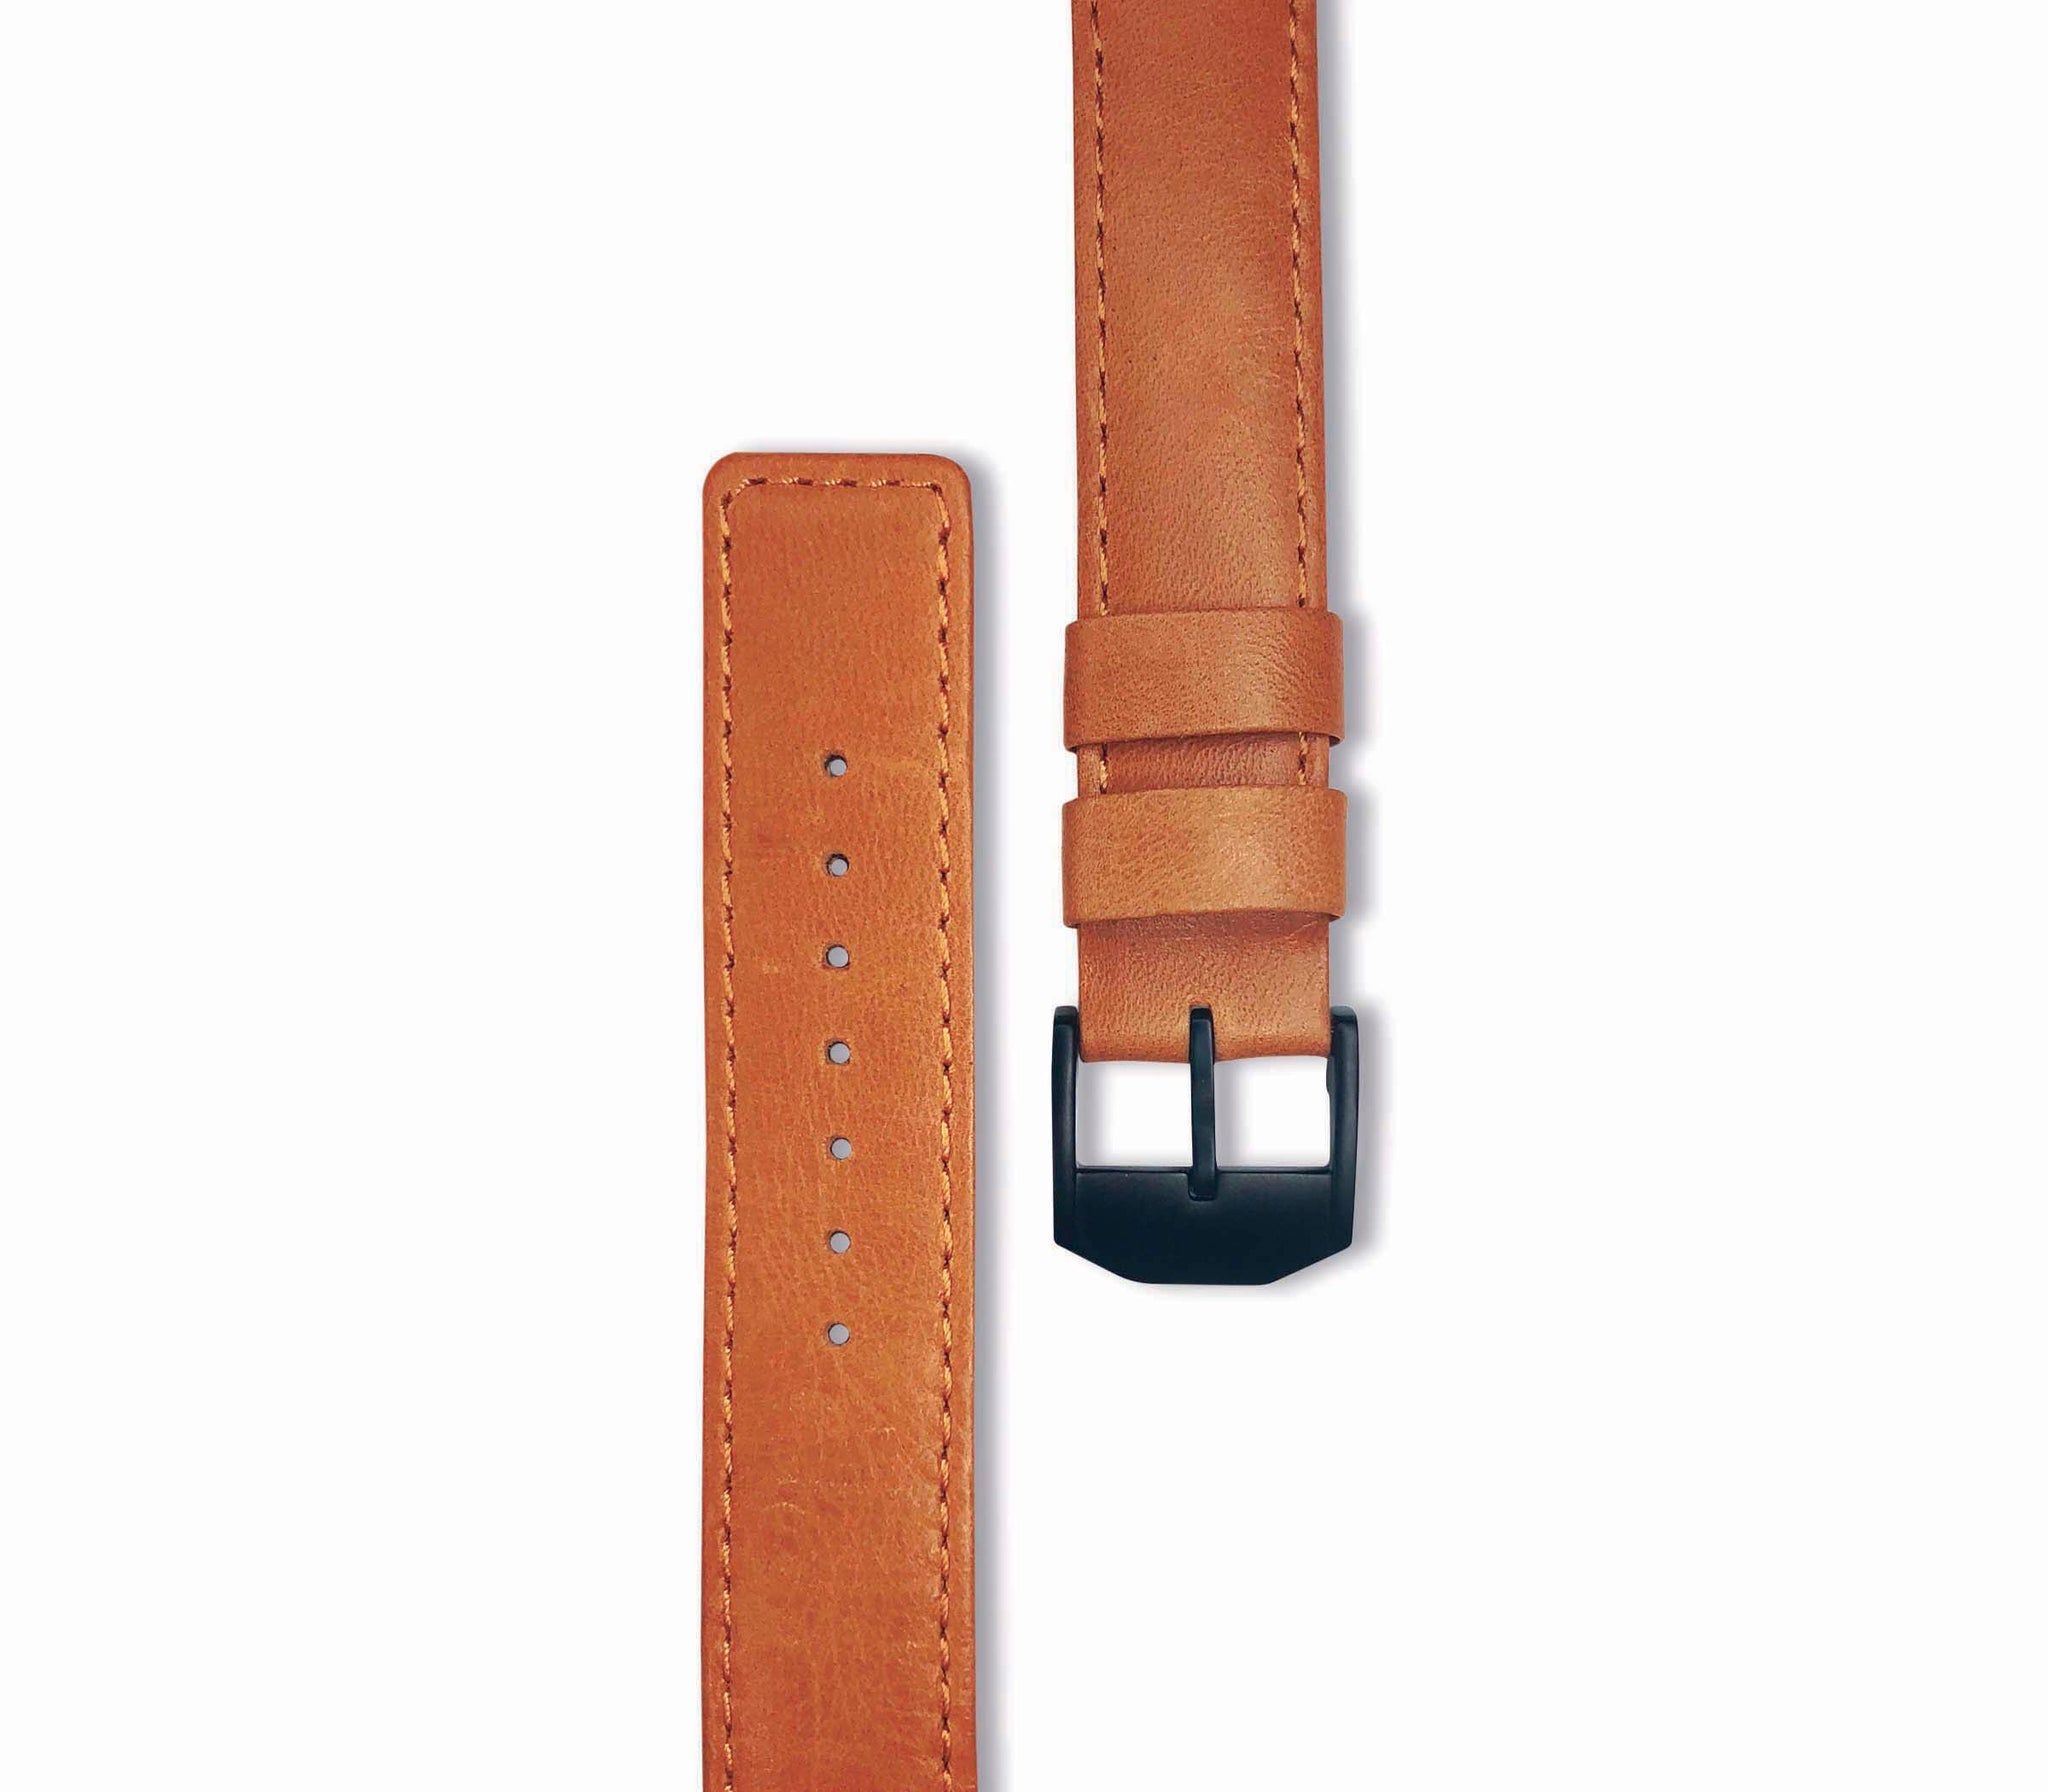 Genuine Leather or Stainless Steel Designer Premium Watch Band Strap For Watches-Watch Band-Mens 40mm-Brown Leather w/ Black Hardware-Heidi Kimura Art LLC